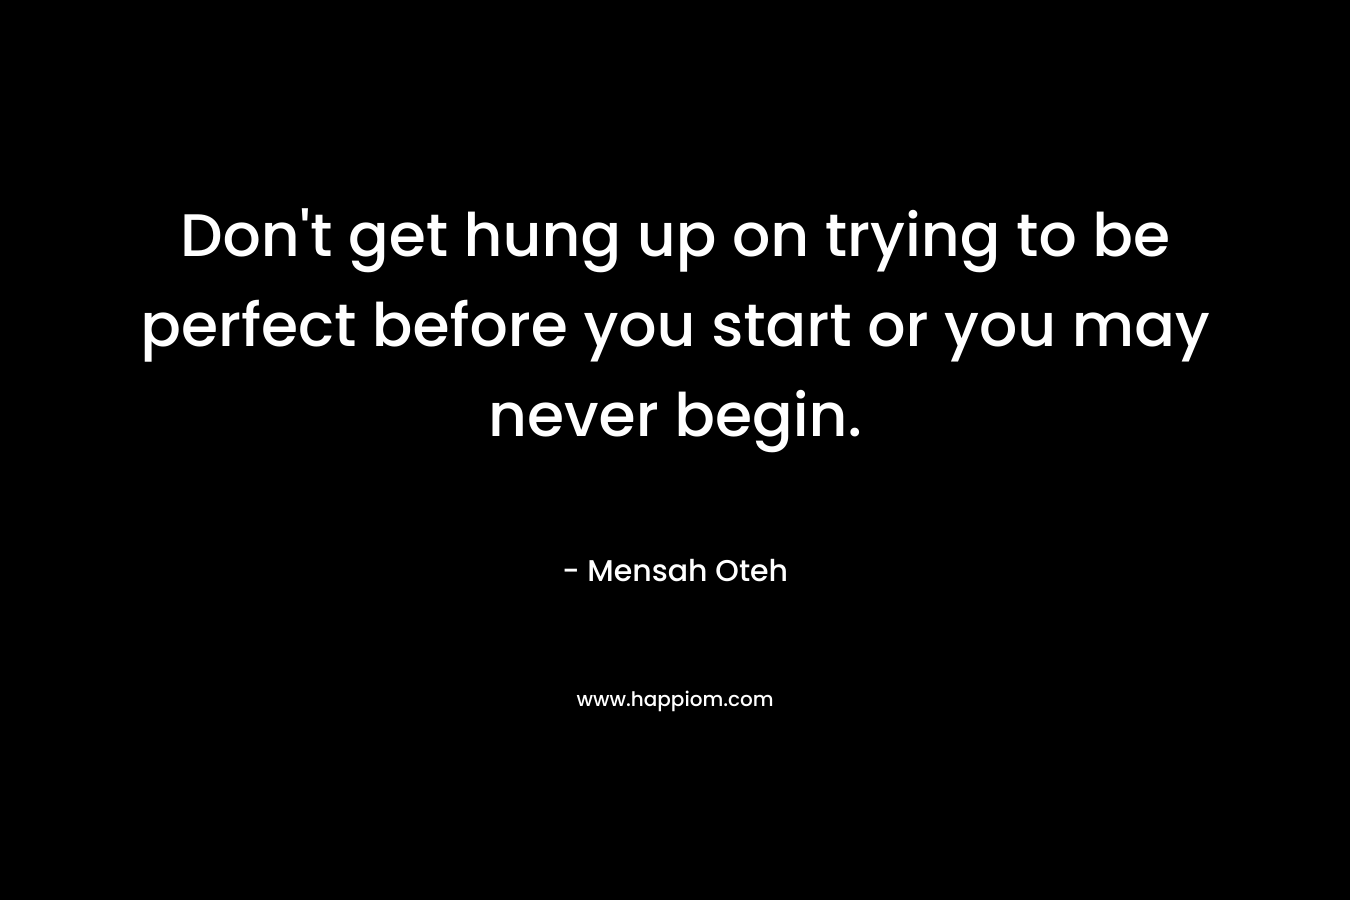 Don't get hung up on trying to be perfect before you start or you may never begin.